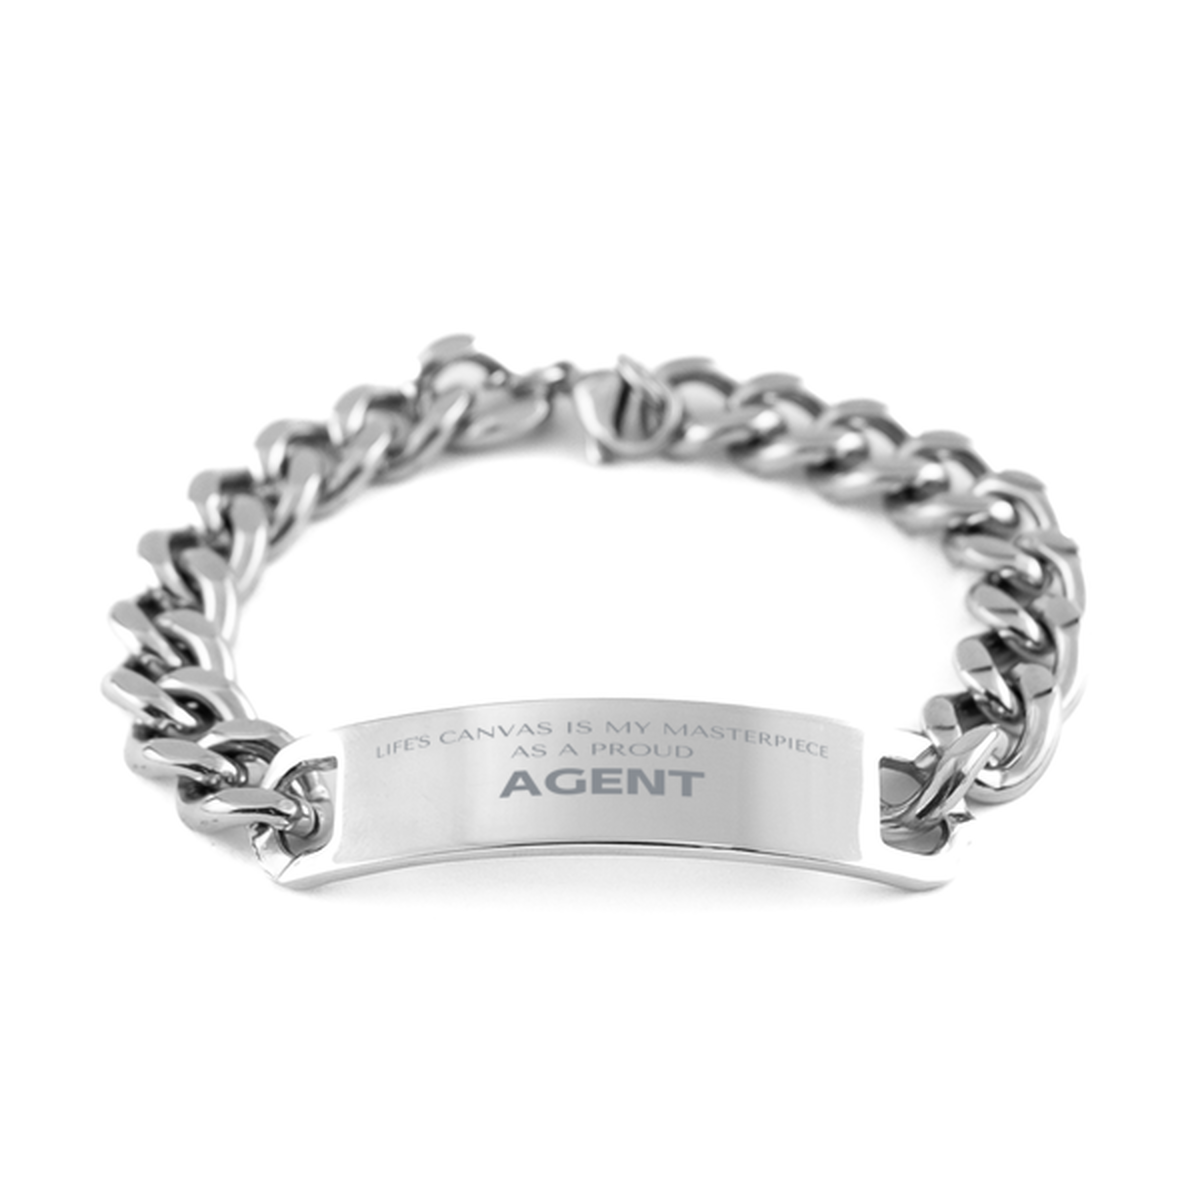 Proud Agent Gifts, Life's canvas is my masterpiece, Epic Birthday Christmas Unique Cuban Chain Stainless Steel Bracelet For Agent, Coworkers, Men, Women, Friends